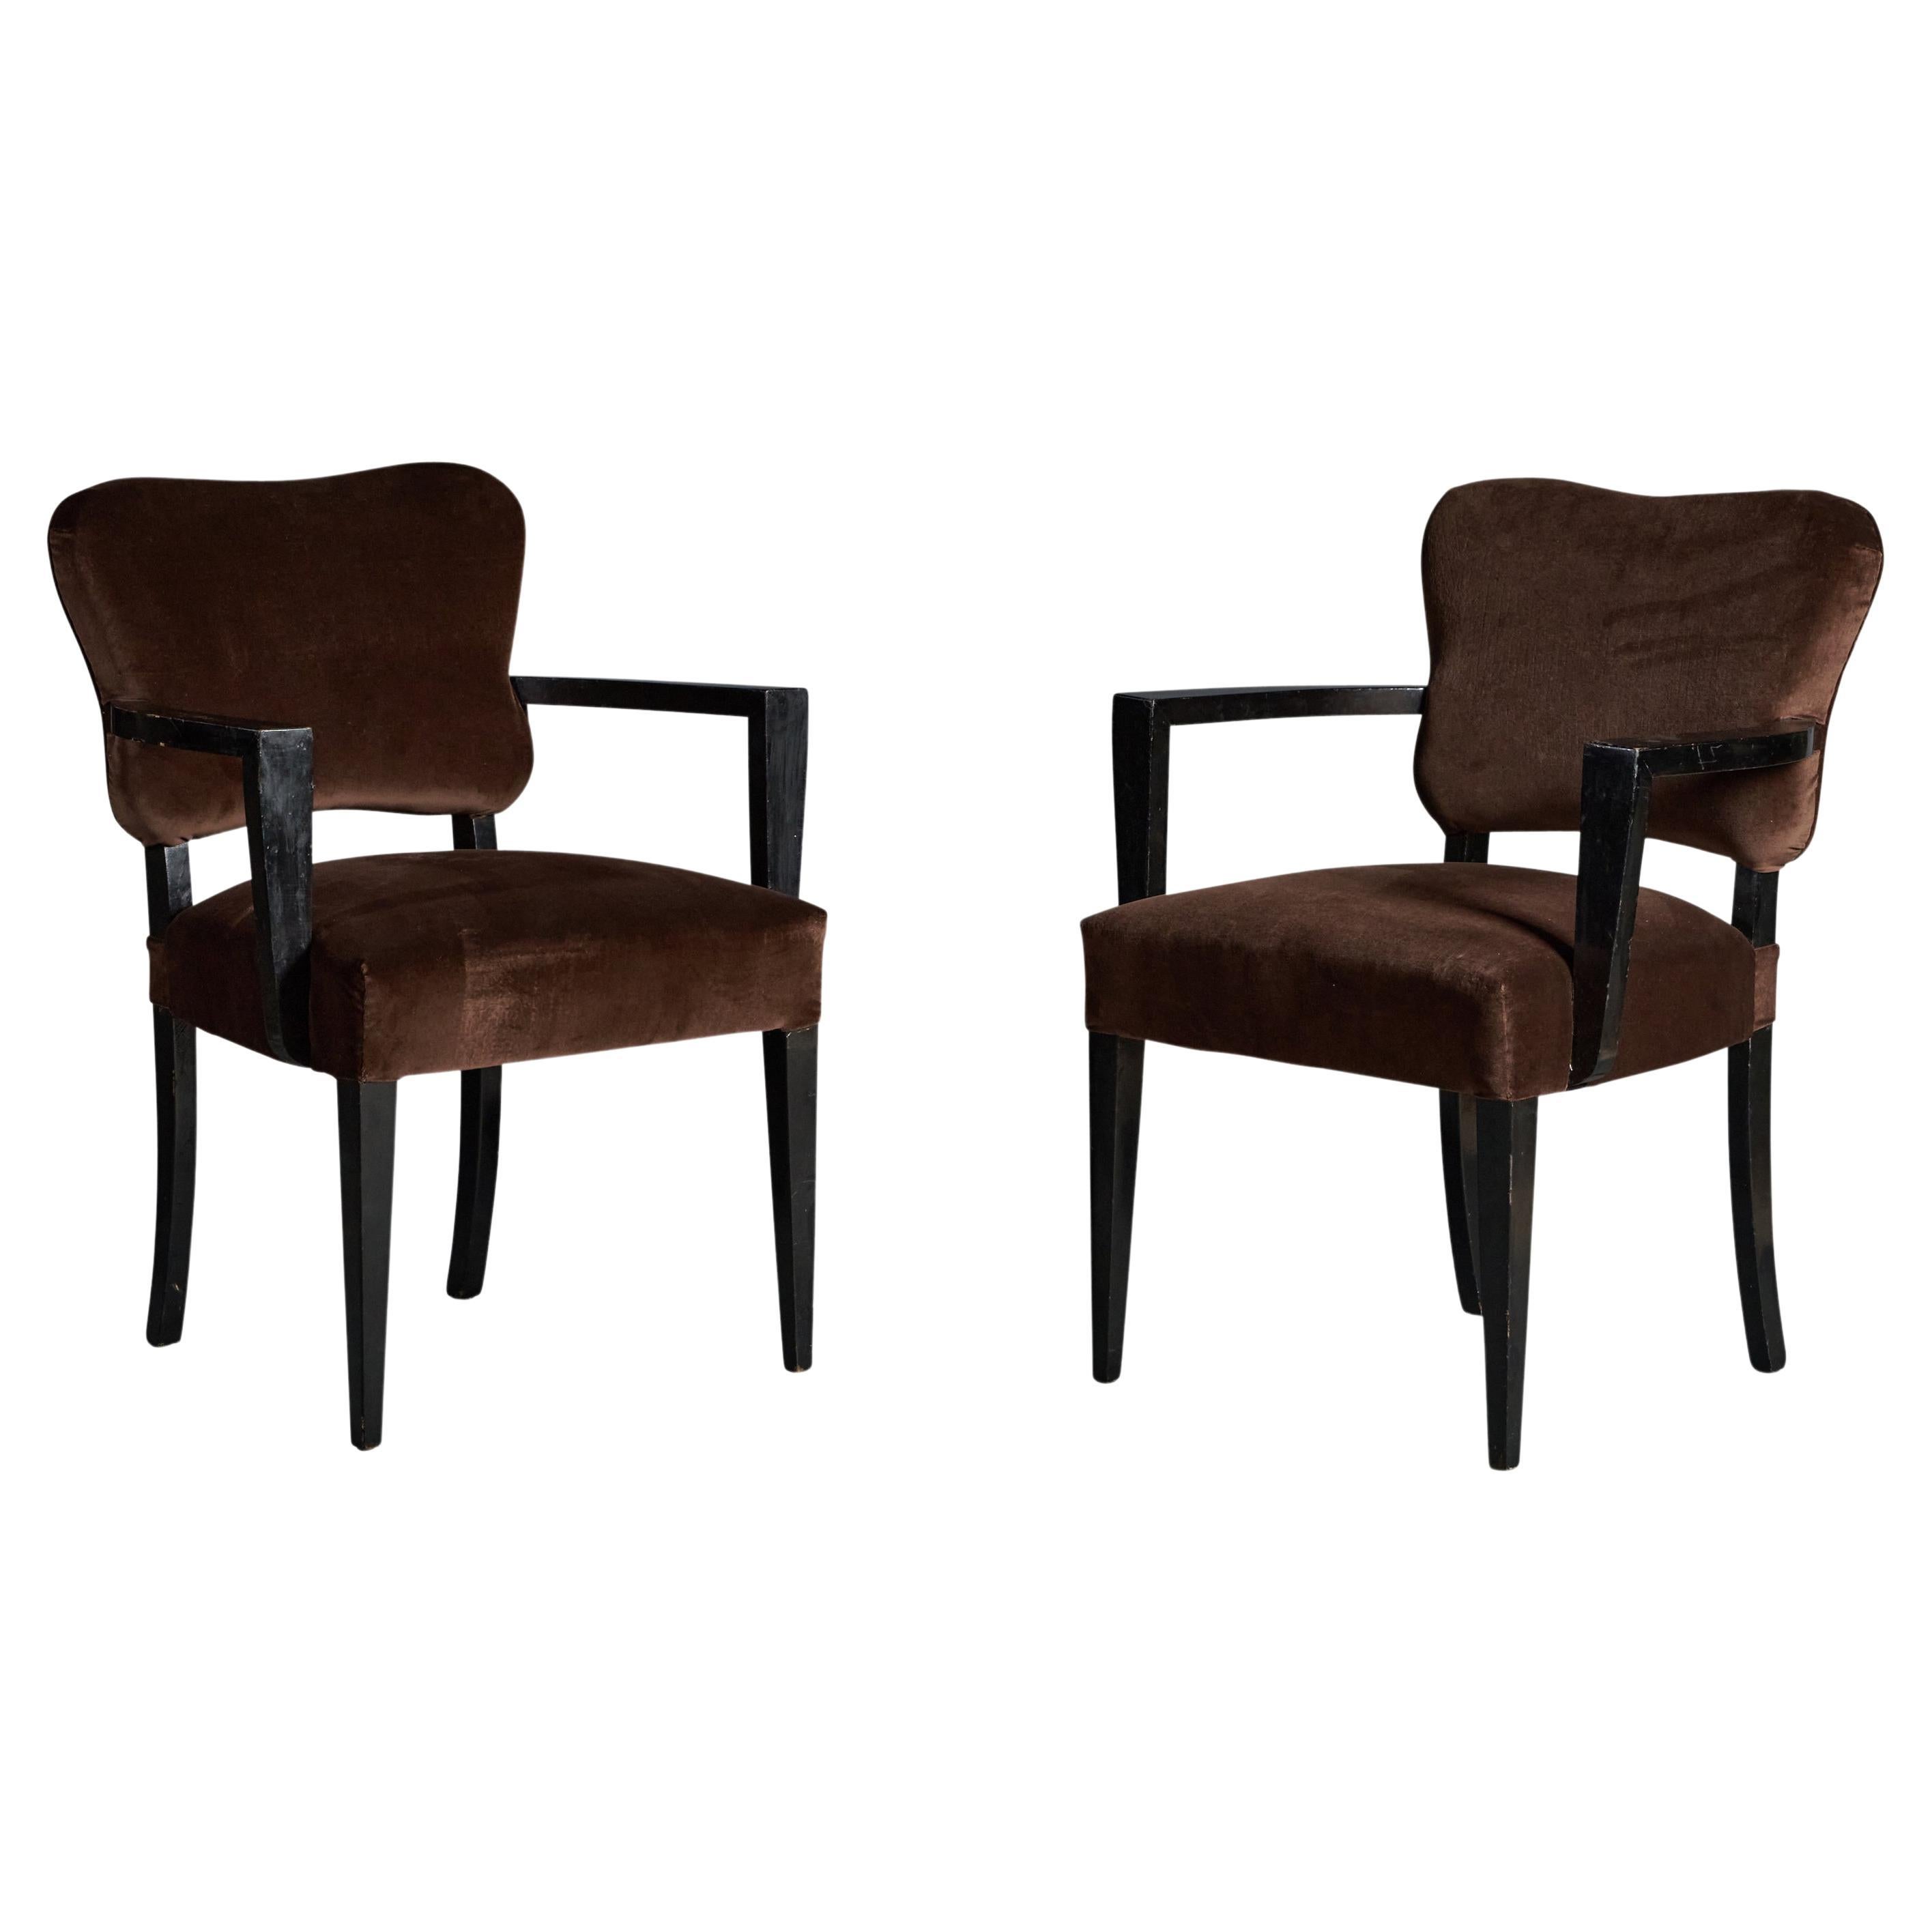 James Mont, Armchairs, Wood, Velvet, USA, 1940s For Sale